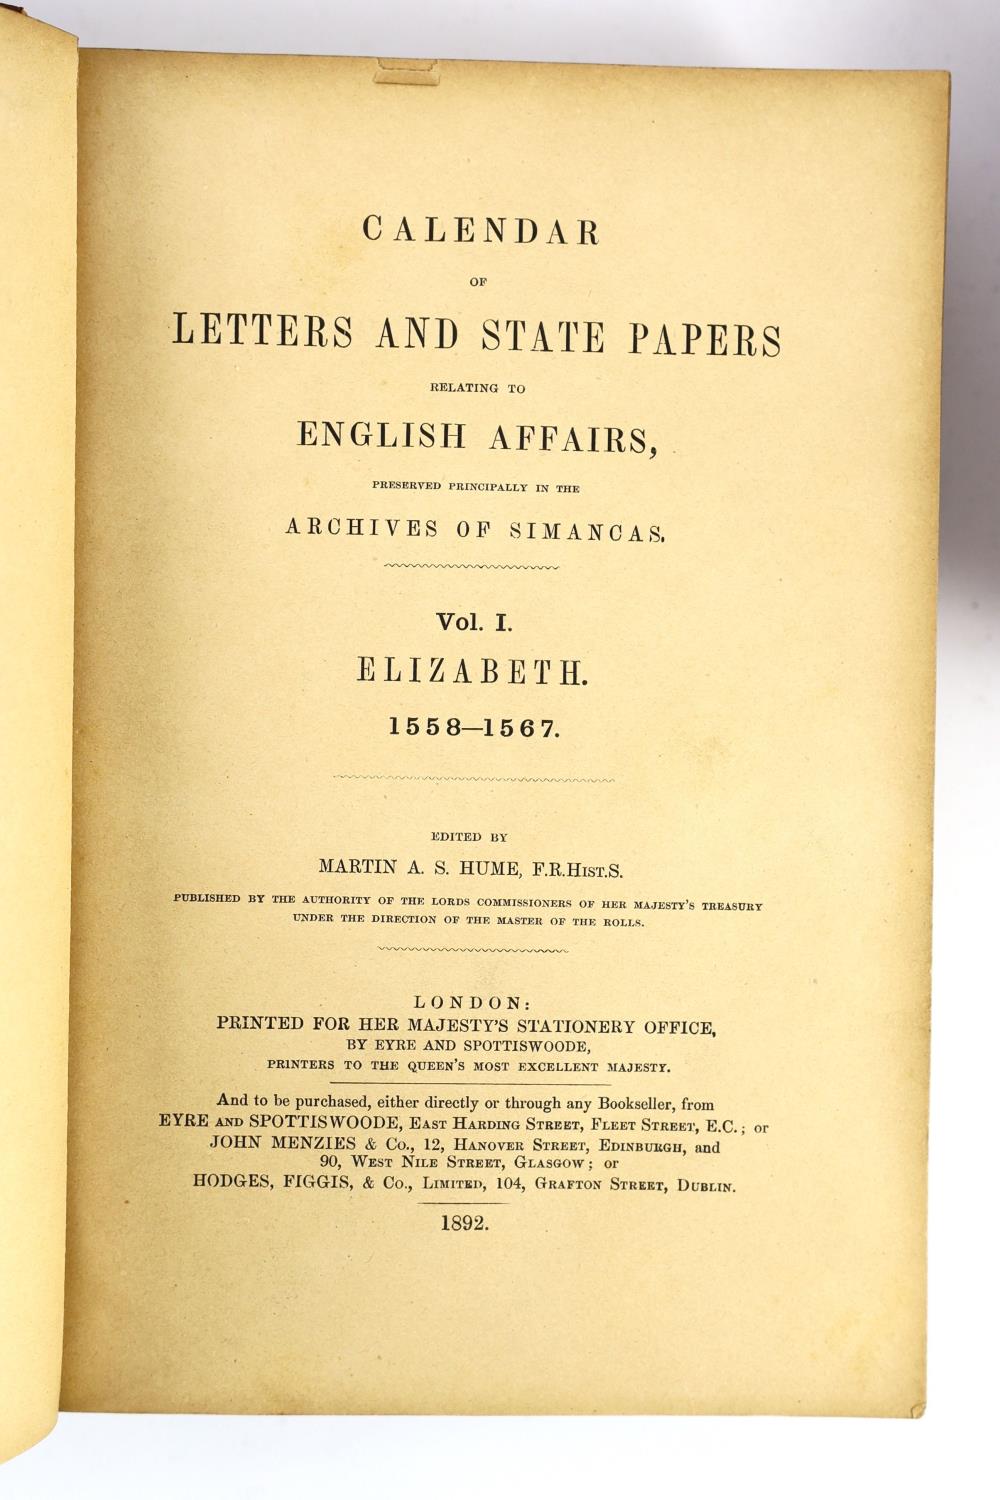 ° ° State Papers (Spanish) - Calendar of Letters and State Papers relating to English Affairs, - Image 2 of 3